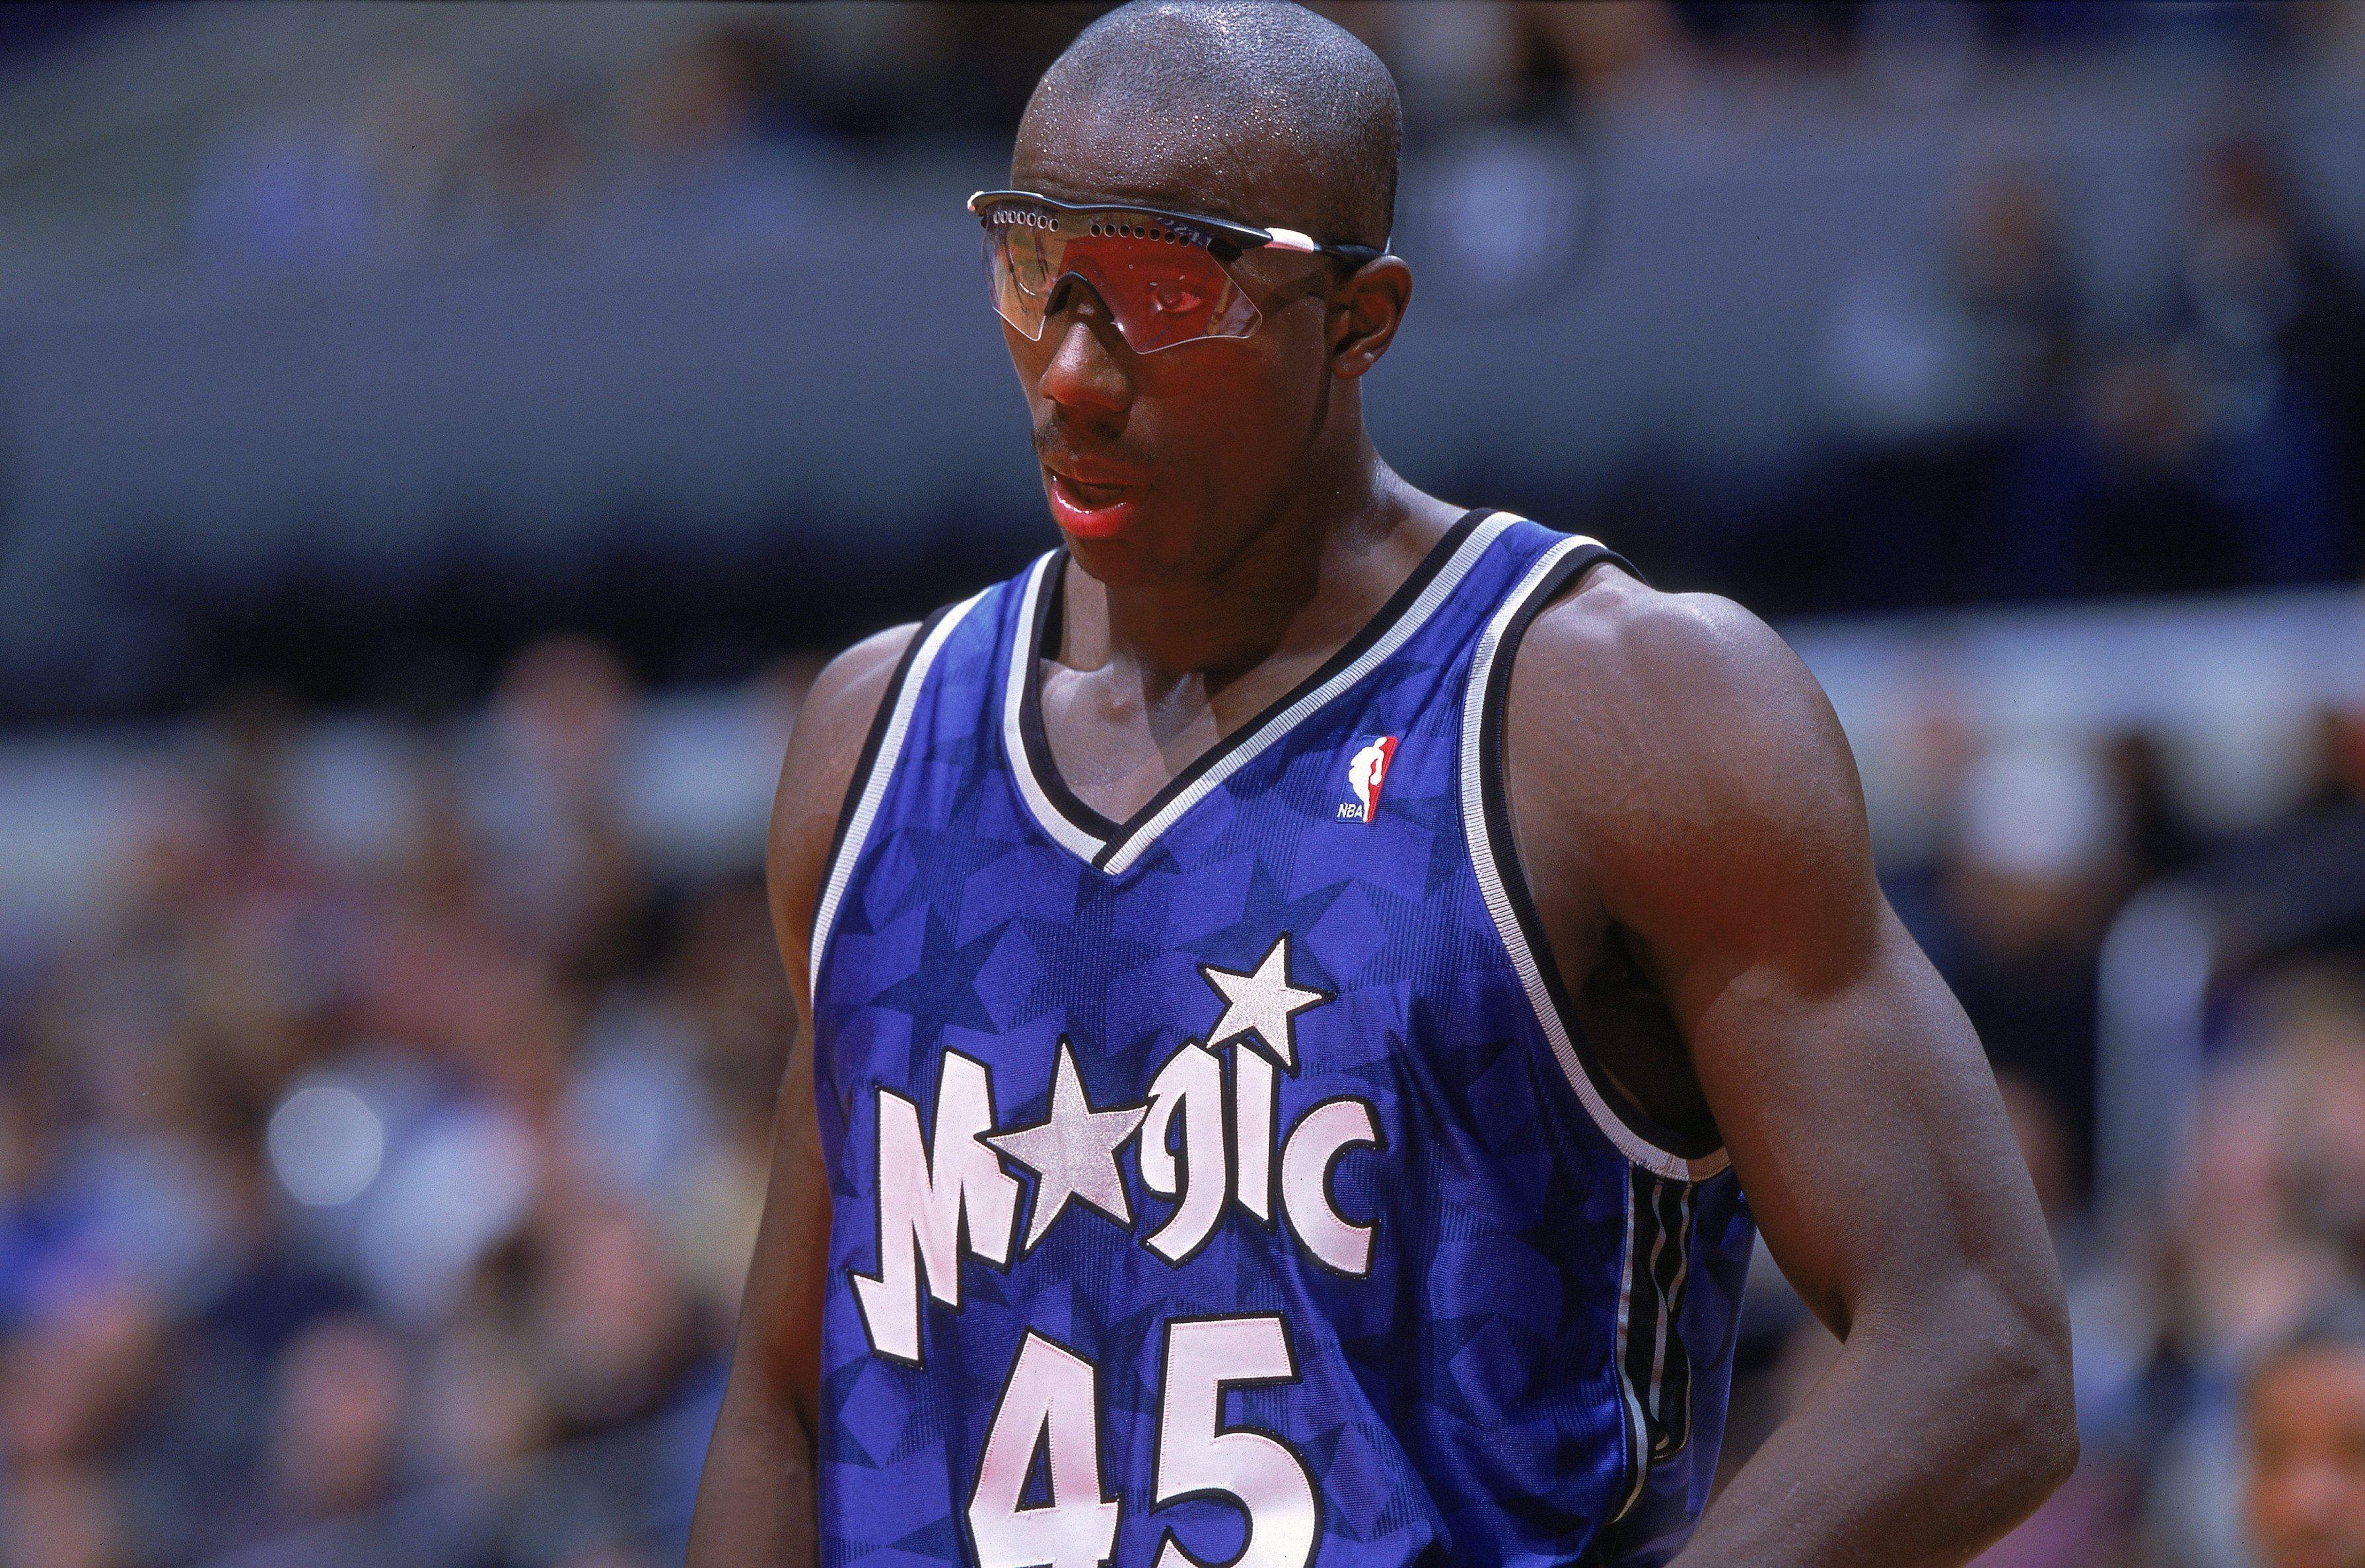 What are the most iconic player accessories in league history? : r/nba